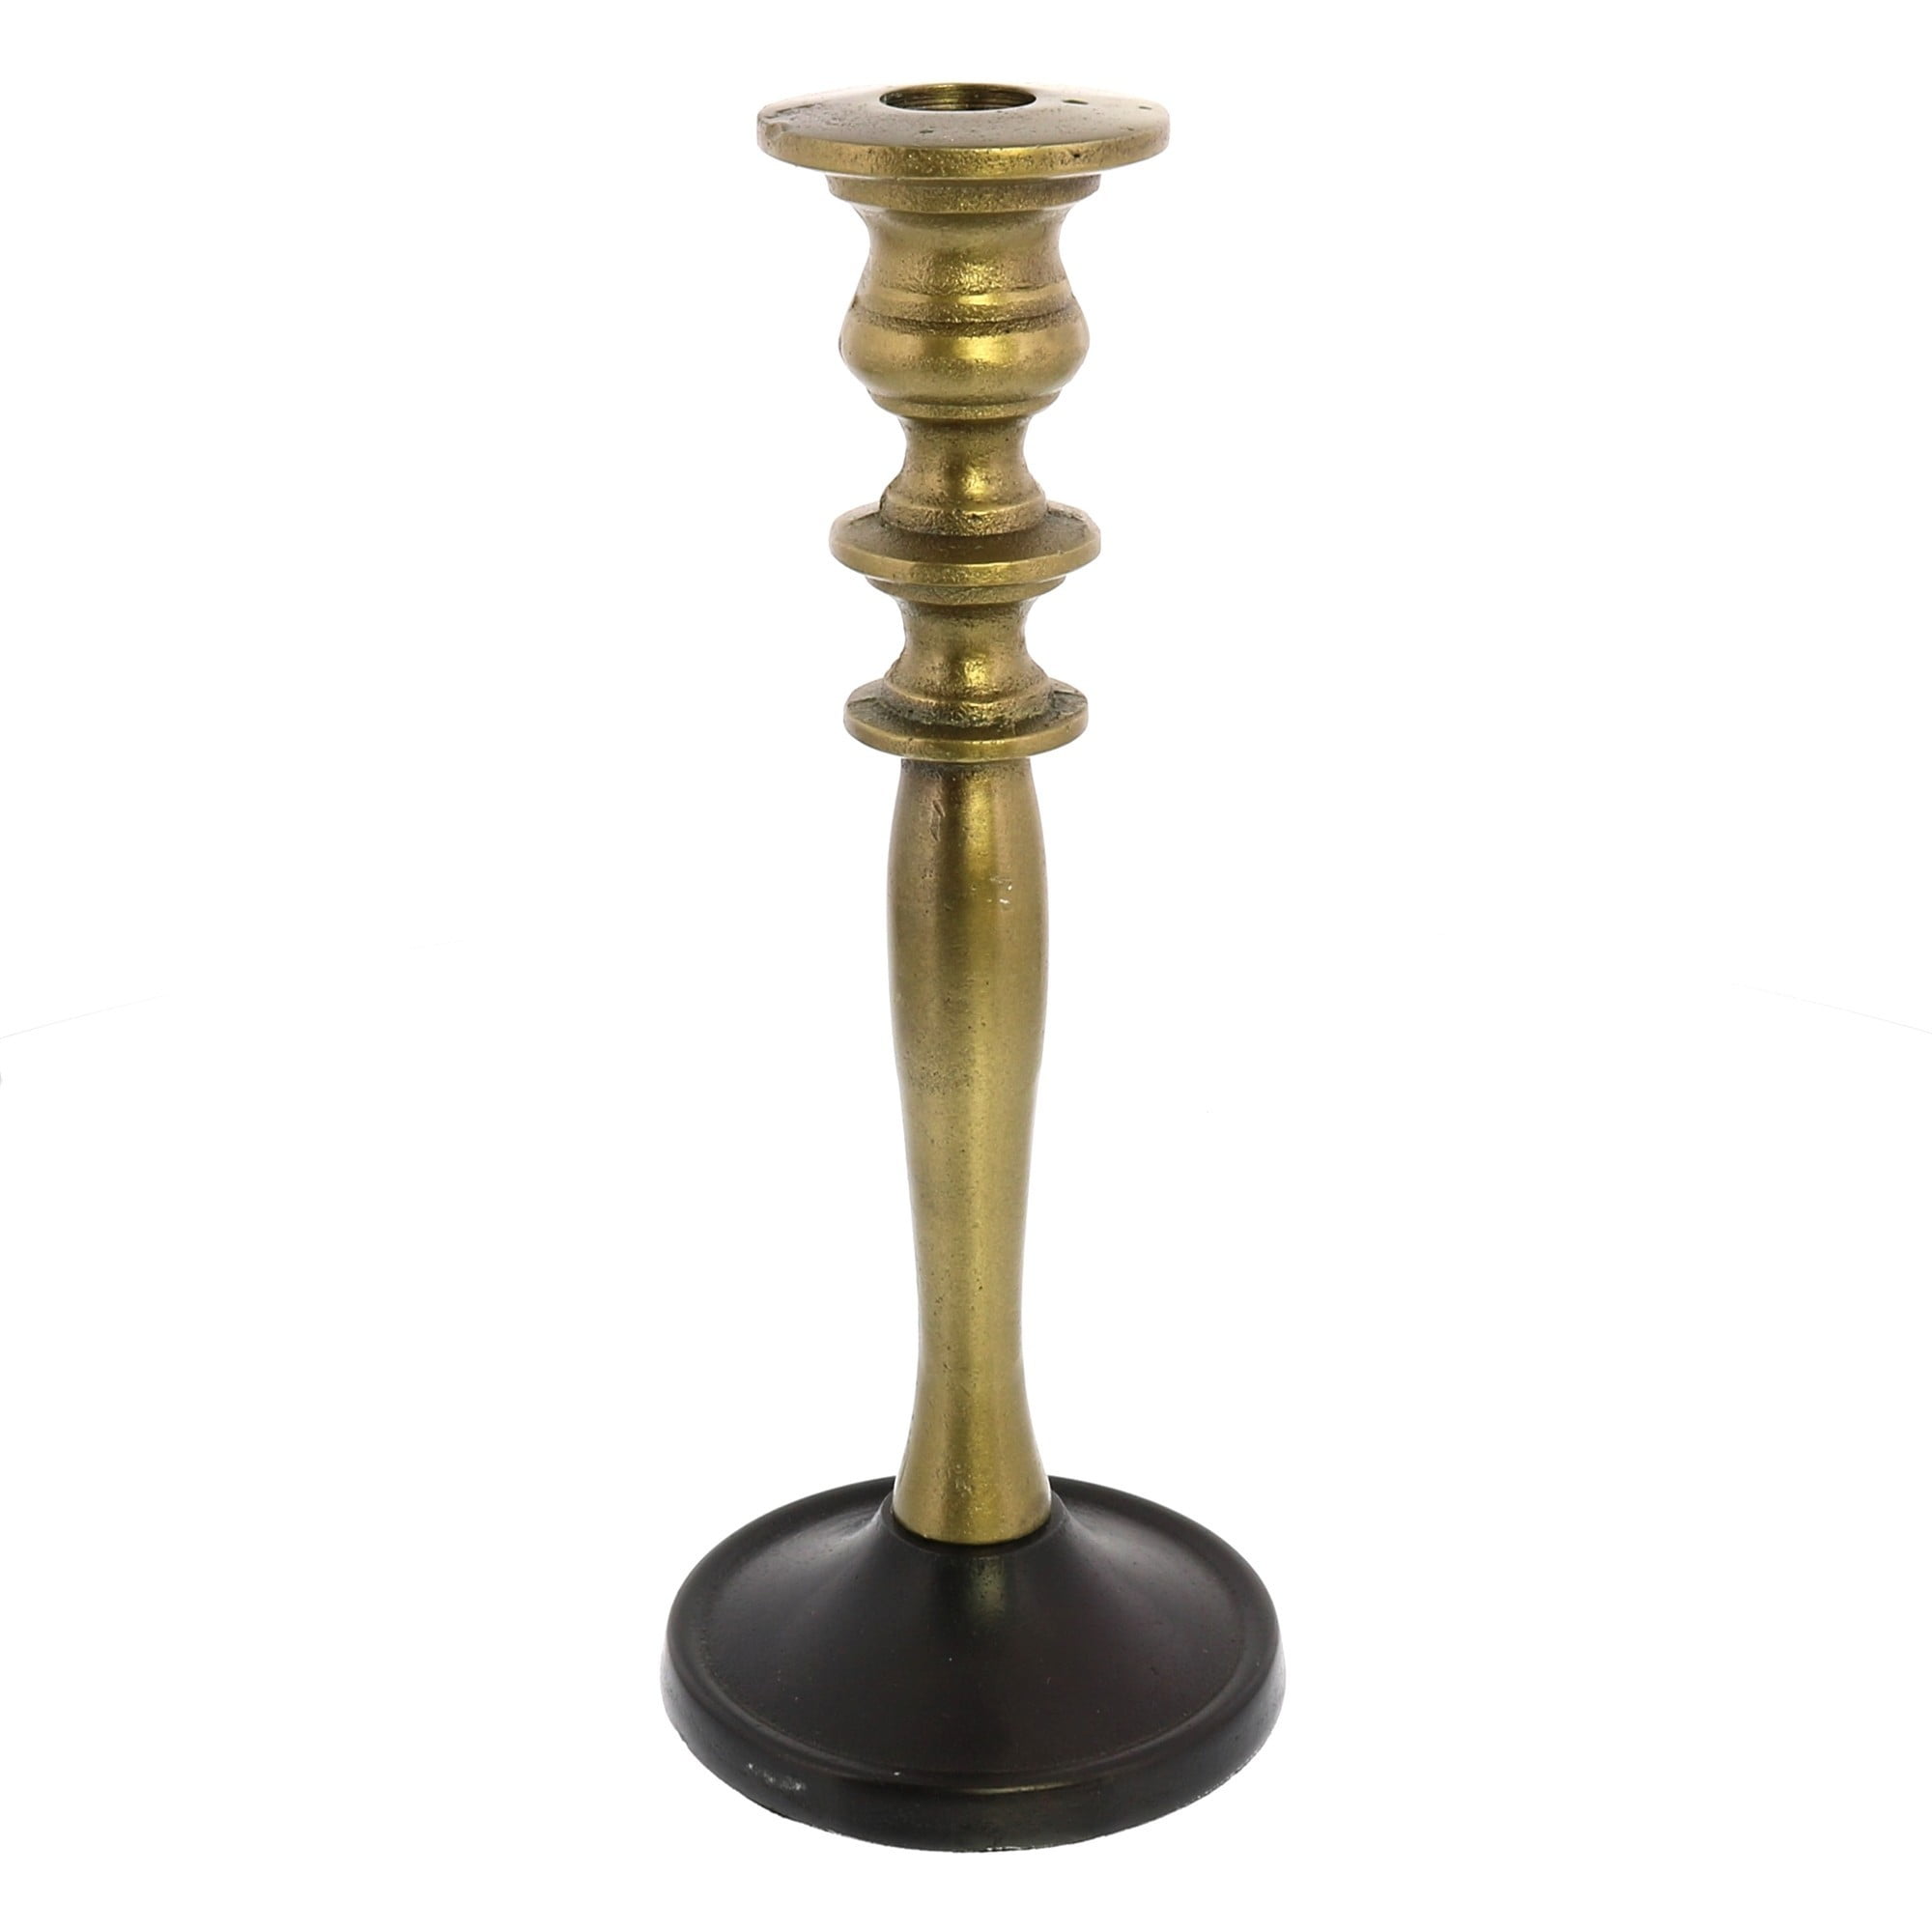 Candle Holder with Turned Post, Medium, Brass and Bronze - Walmart.com ...